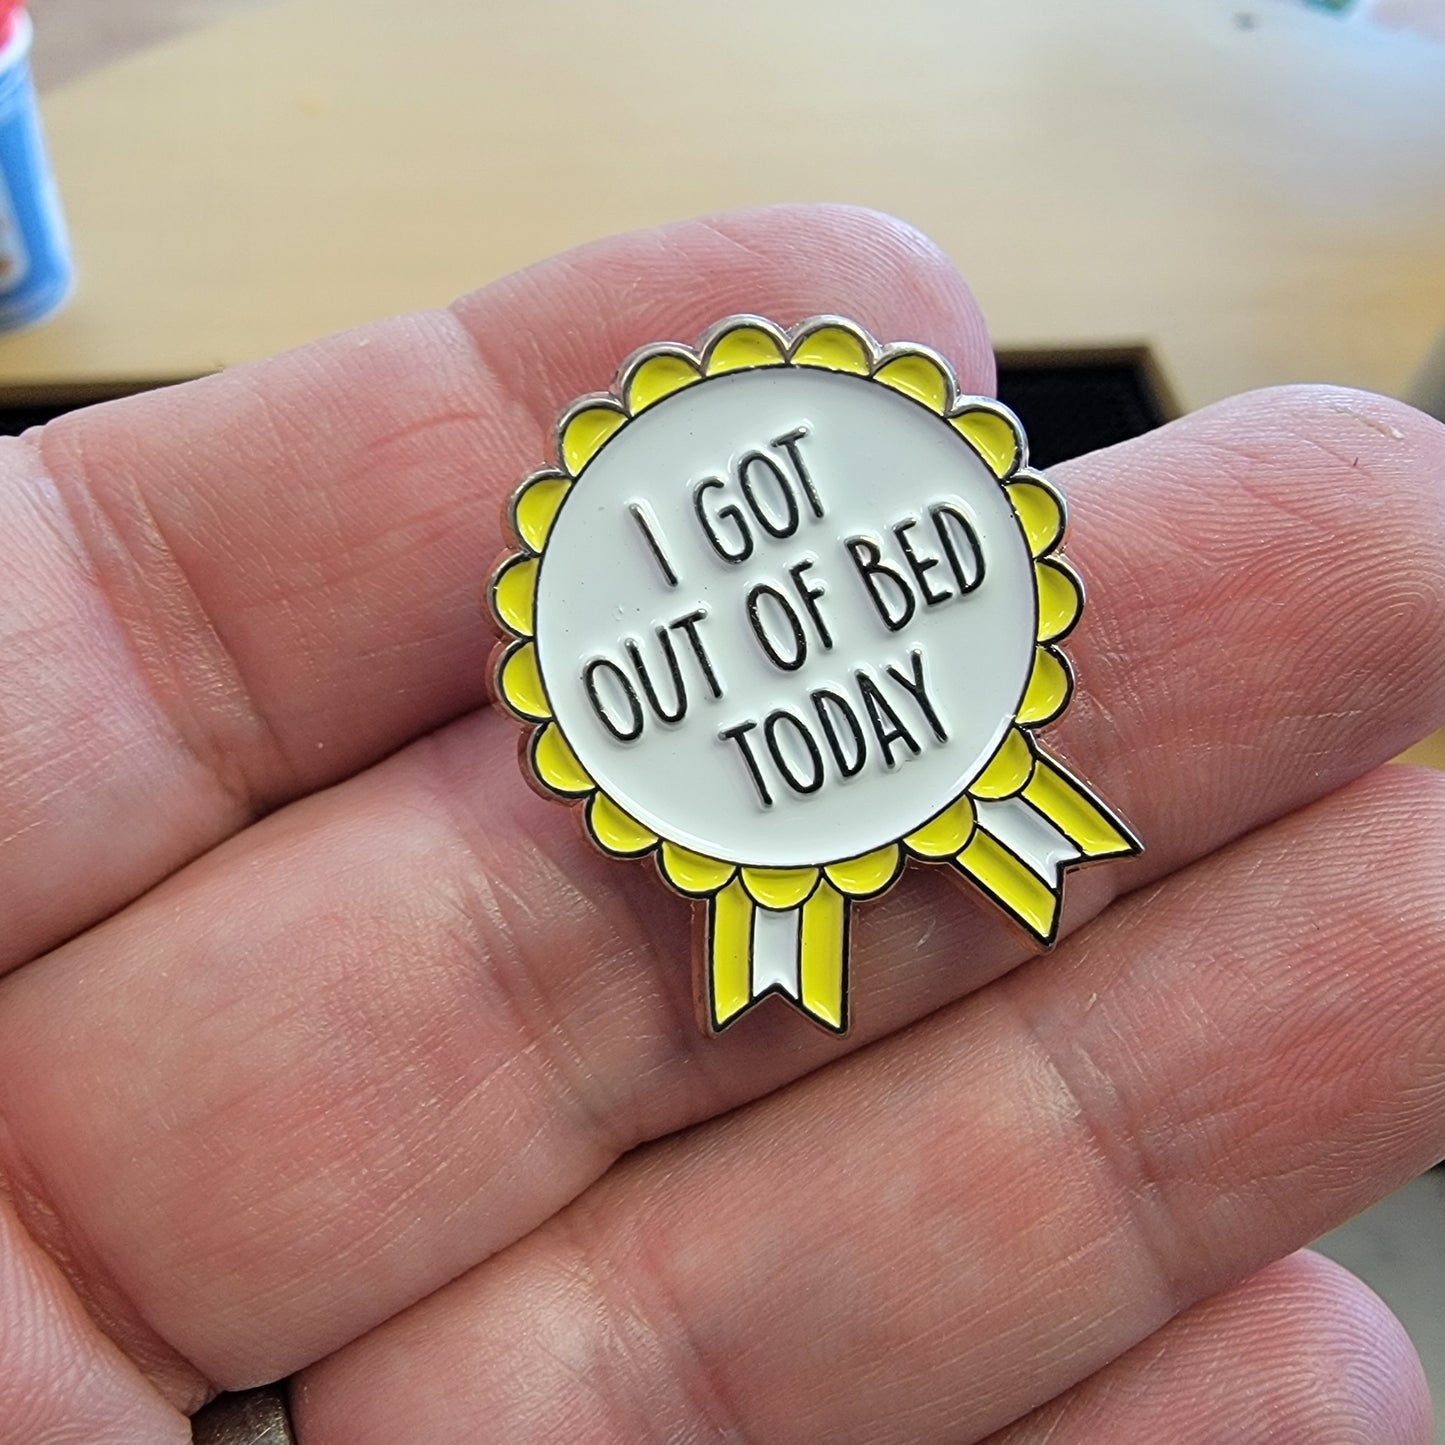 "I Got Out of Bed Today" Enamel Pin